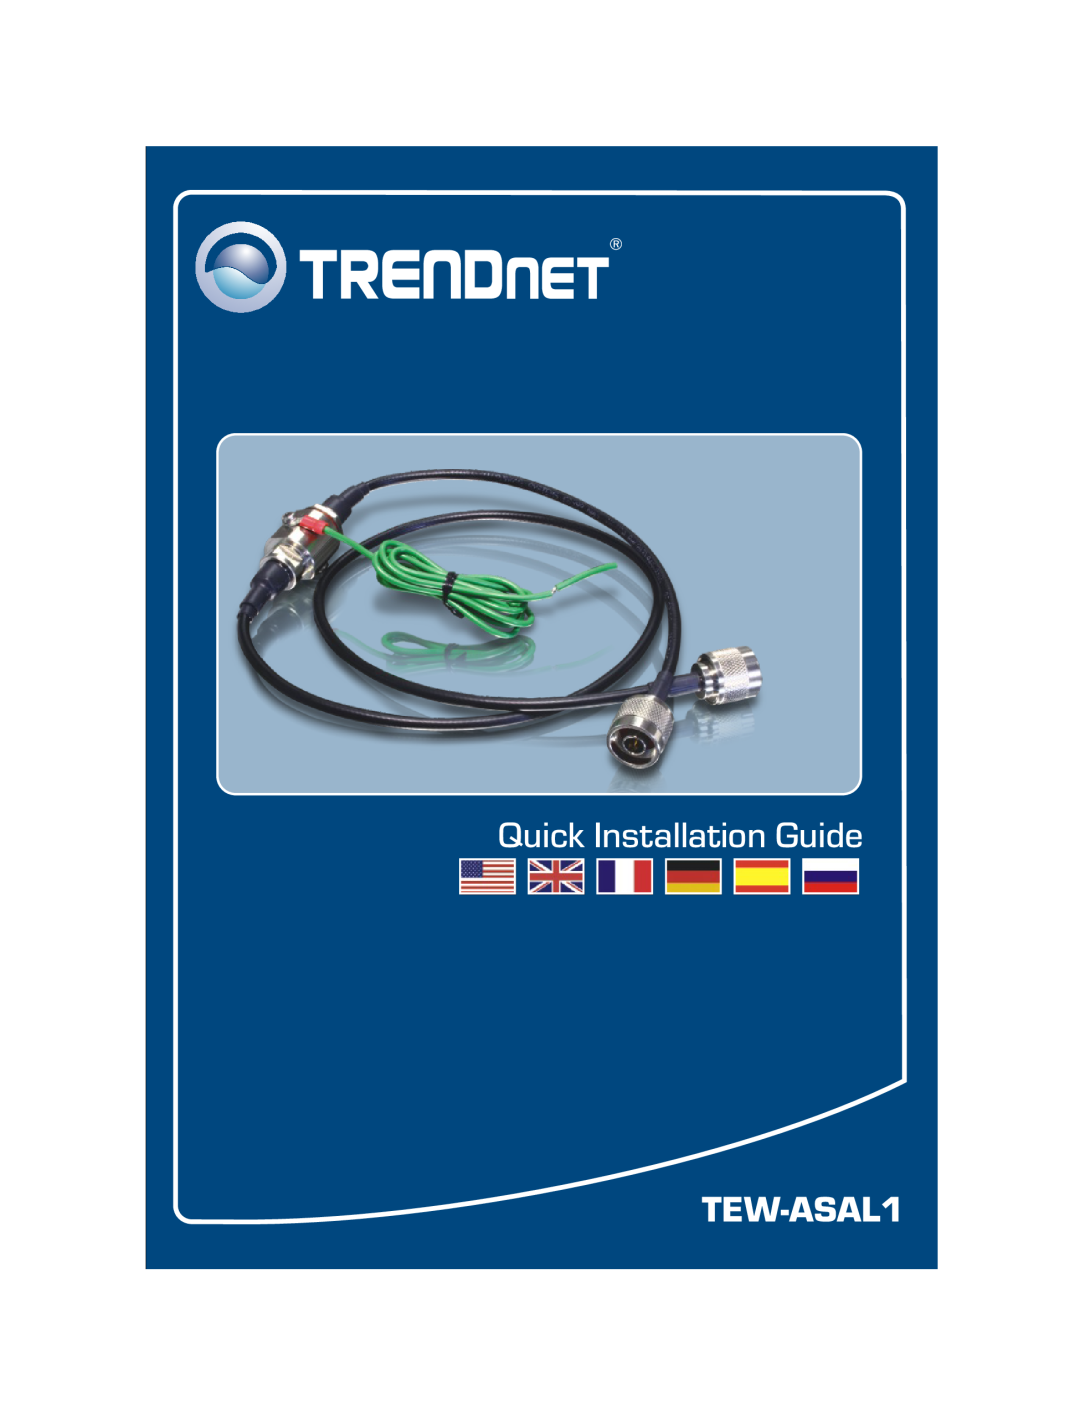 TRENDnet TEW-ASAL1 manual Quick Installation Guide 